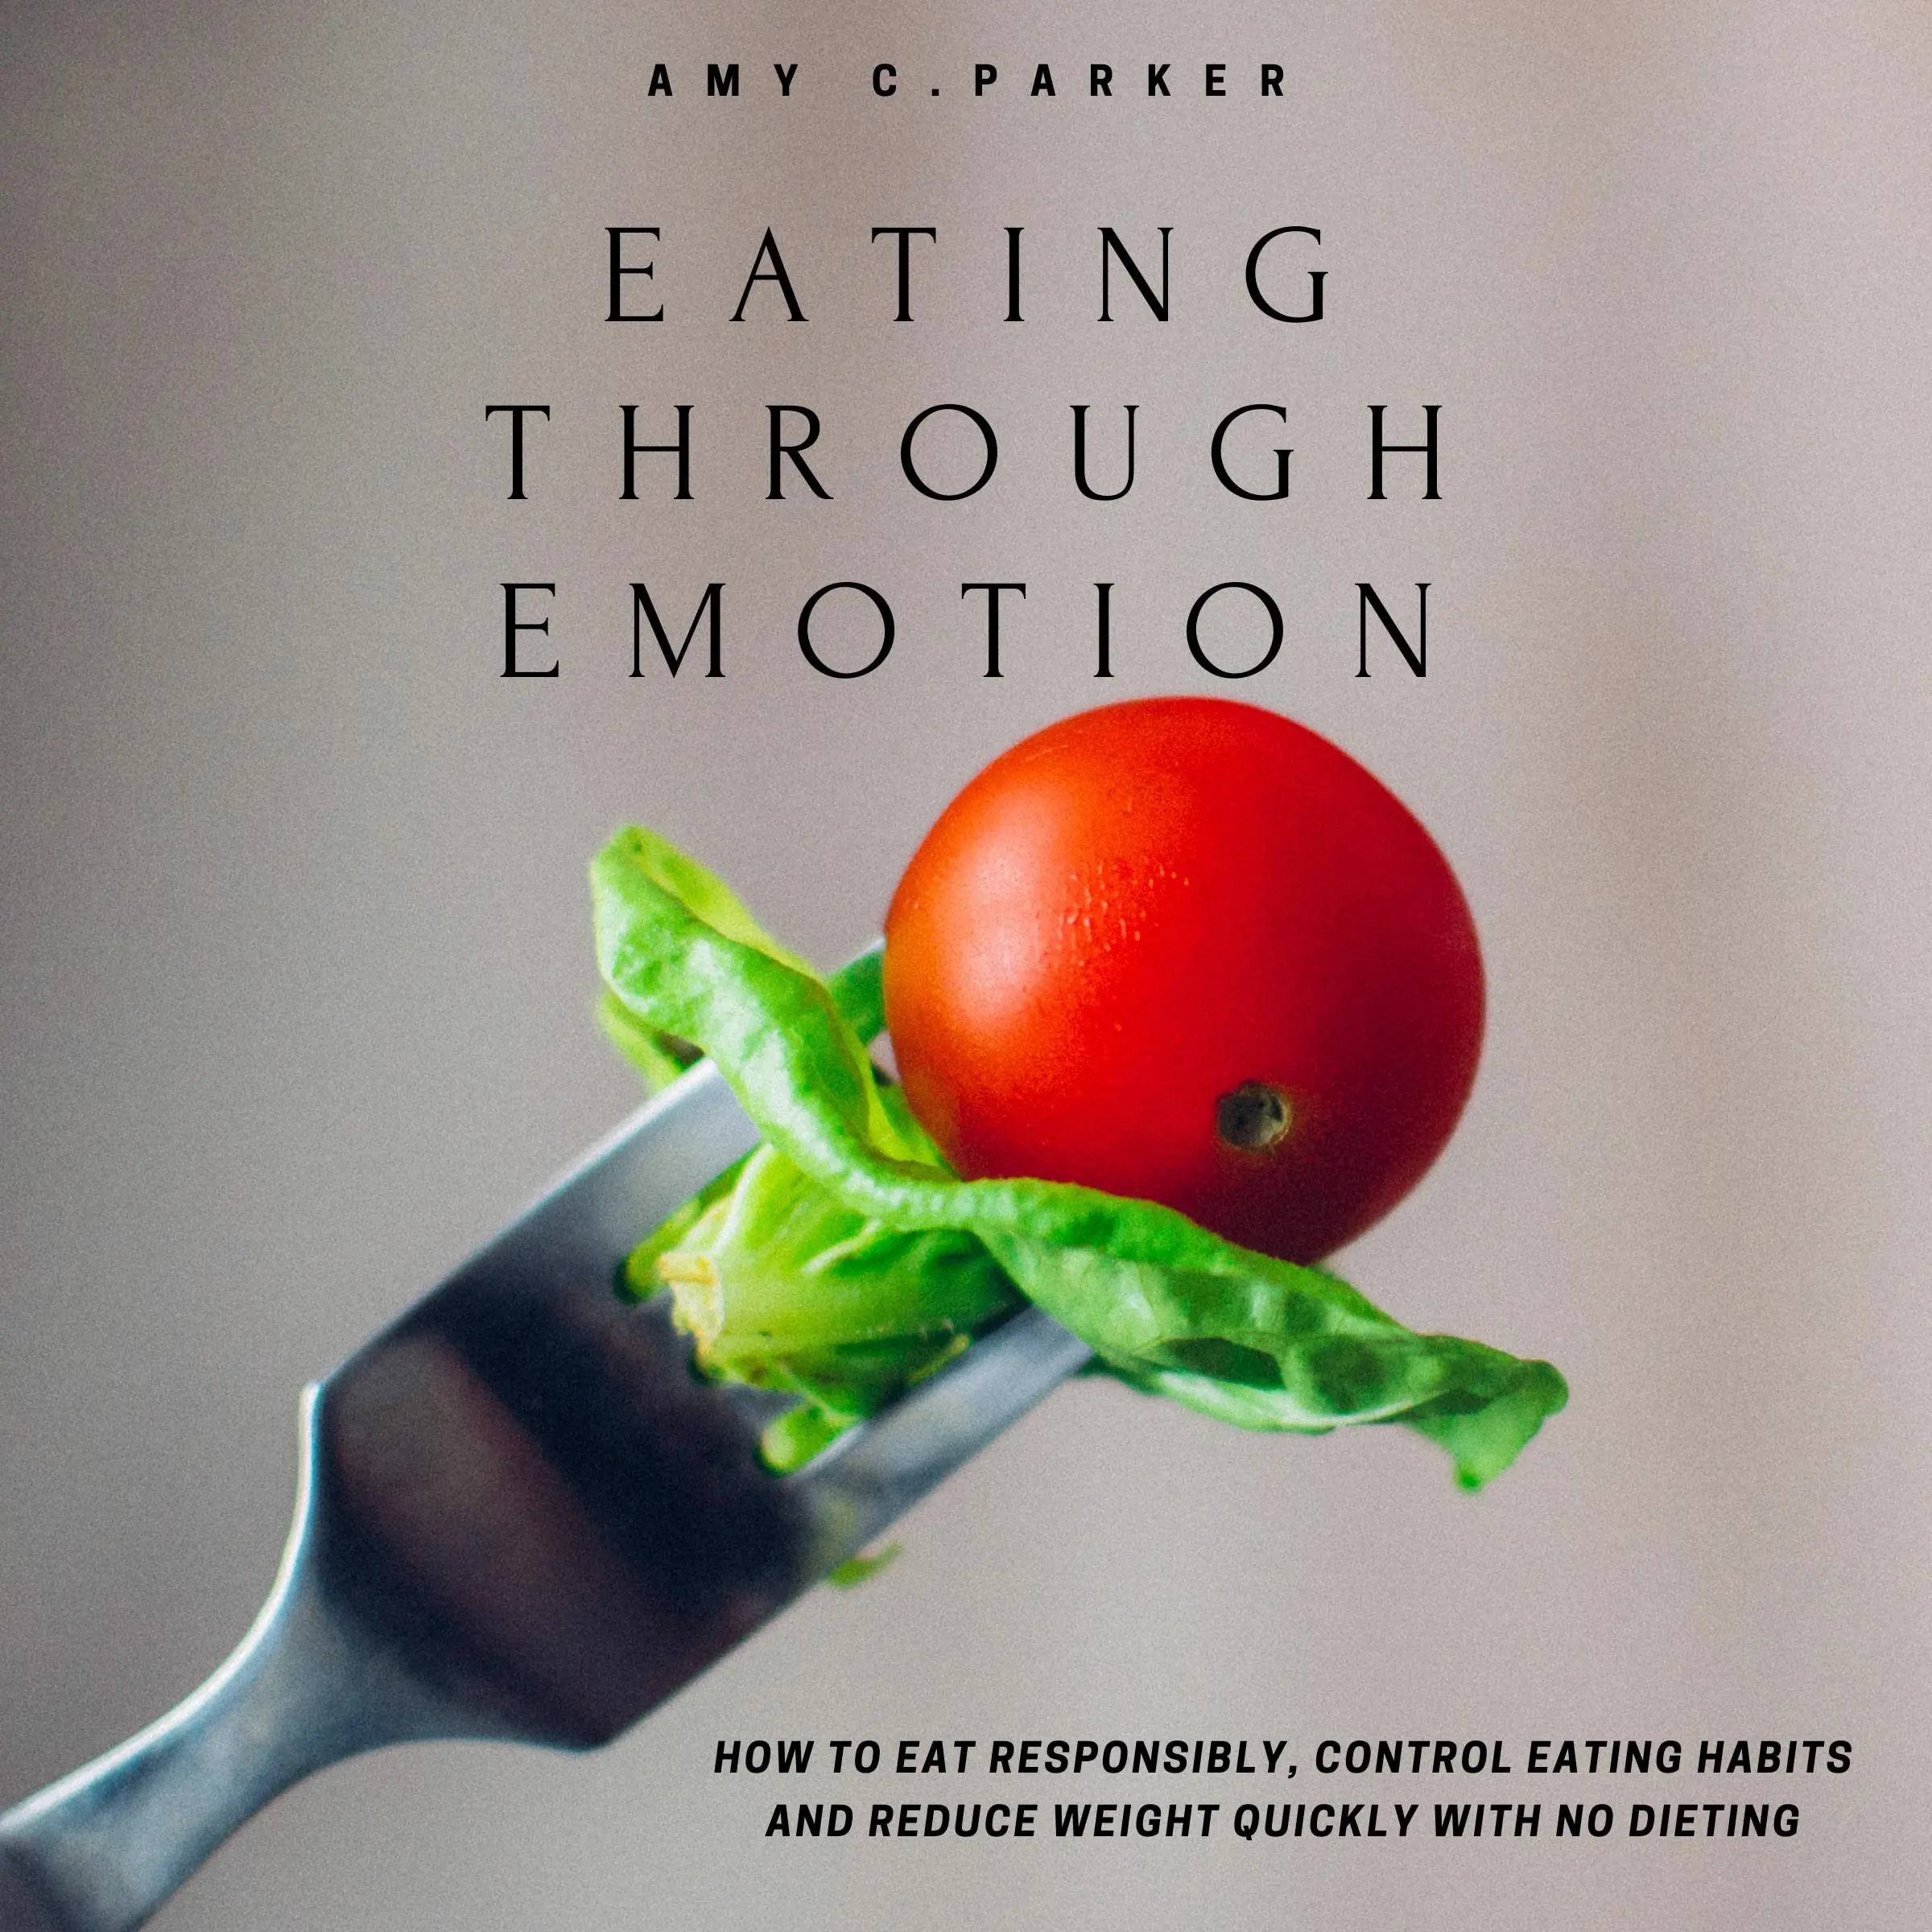 Eating Through Emotion - How to Eat Responsibly, Control Eating Habits and Reduce Weight Quickly with No Dieting Audiobook by Amy C Parker